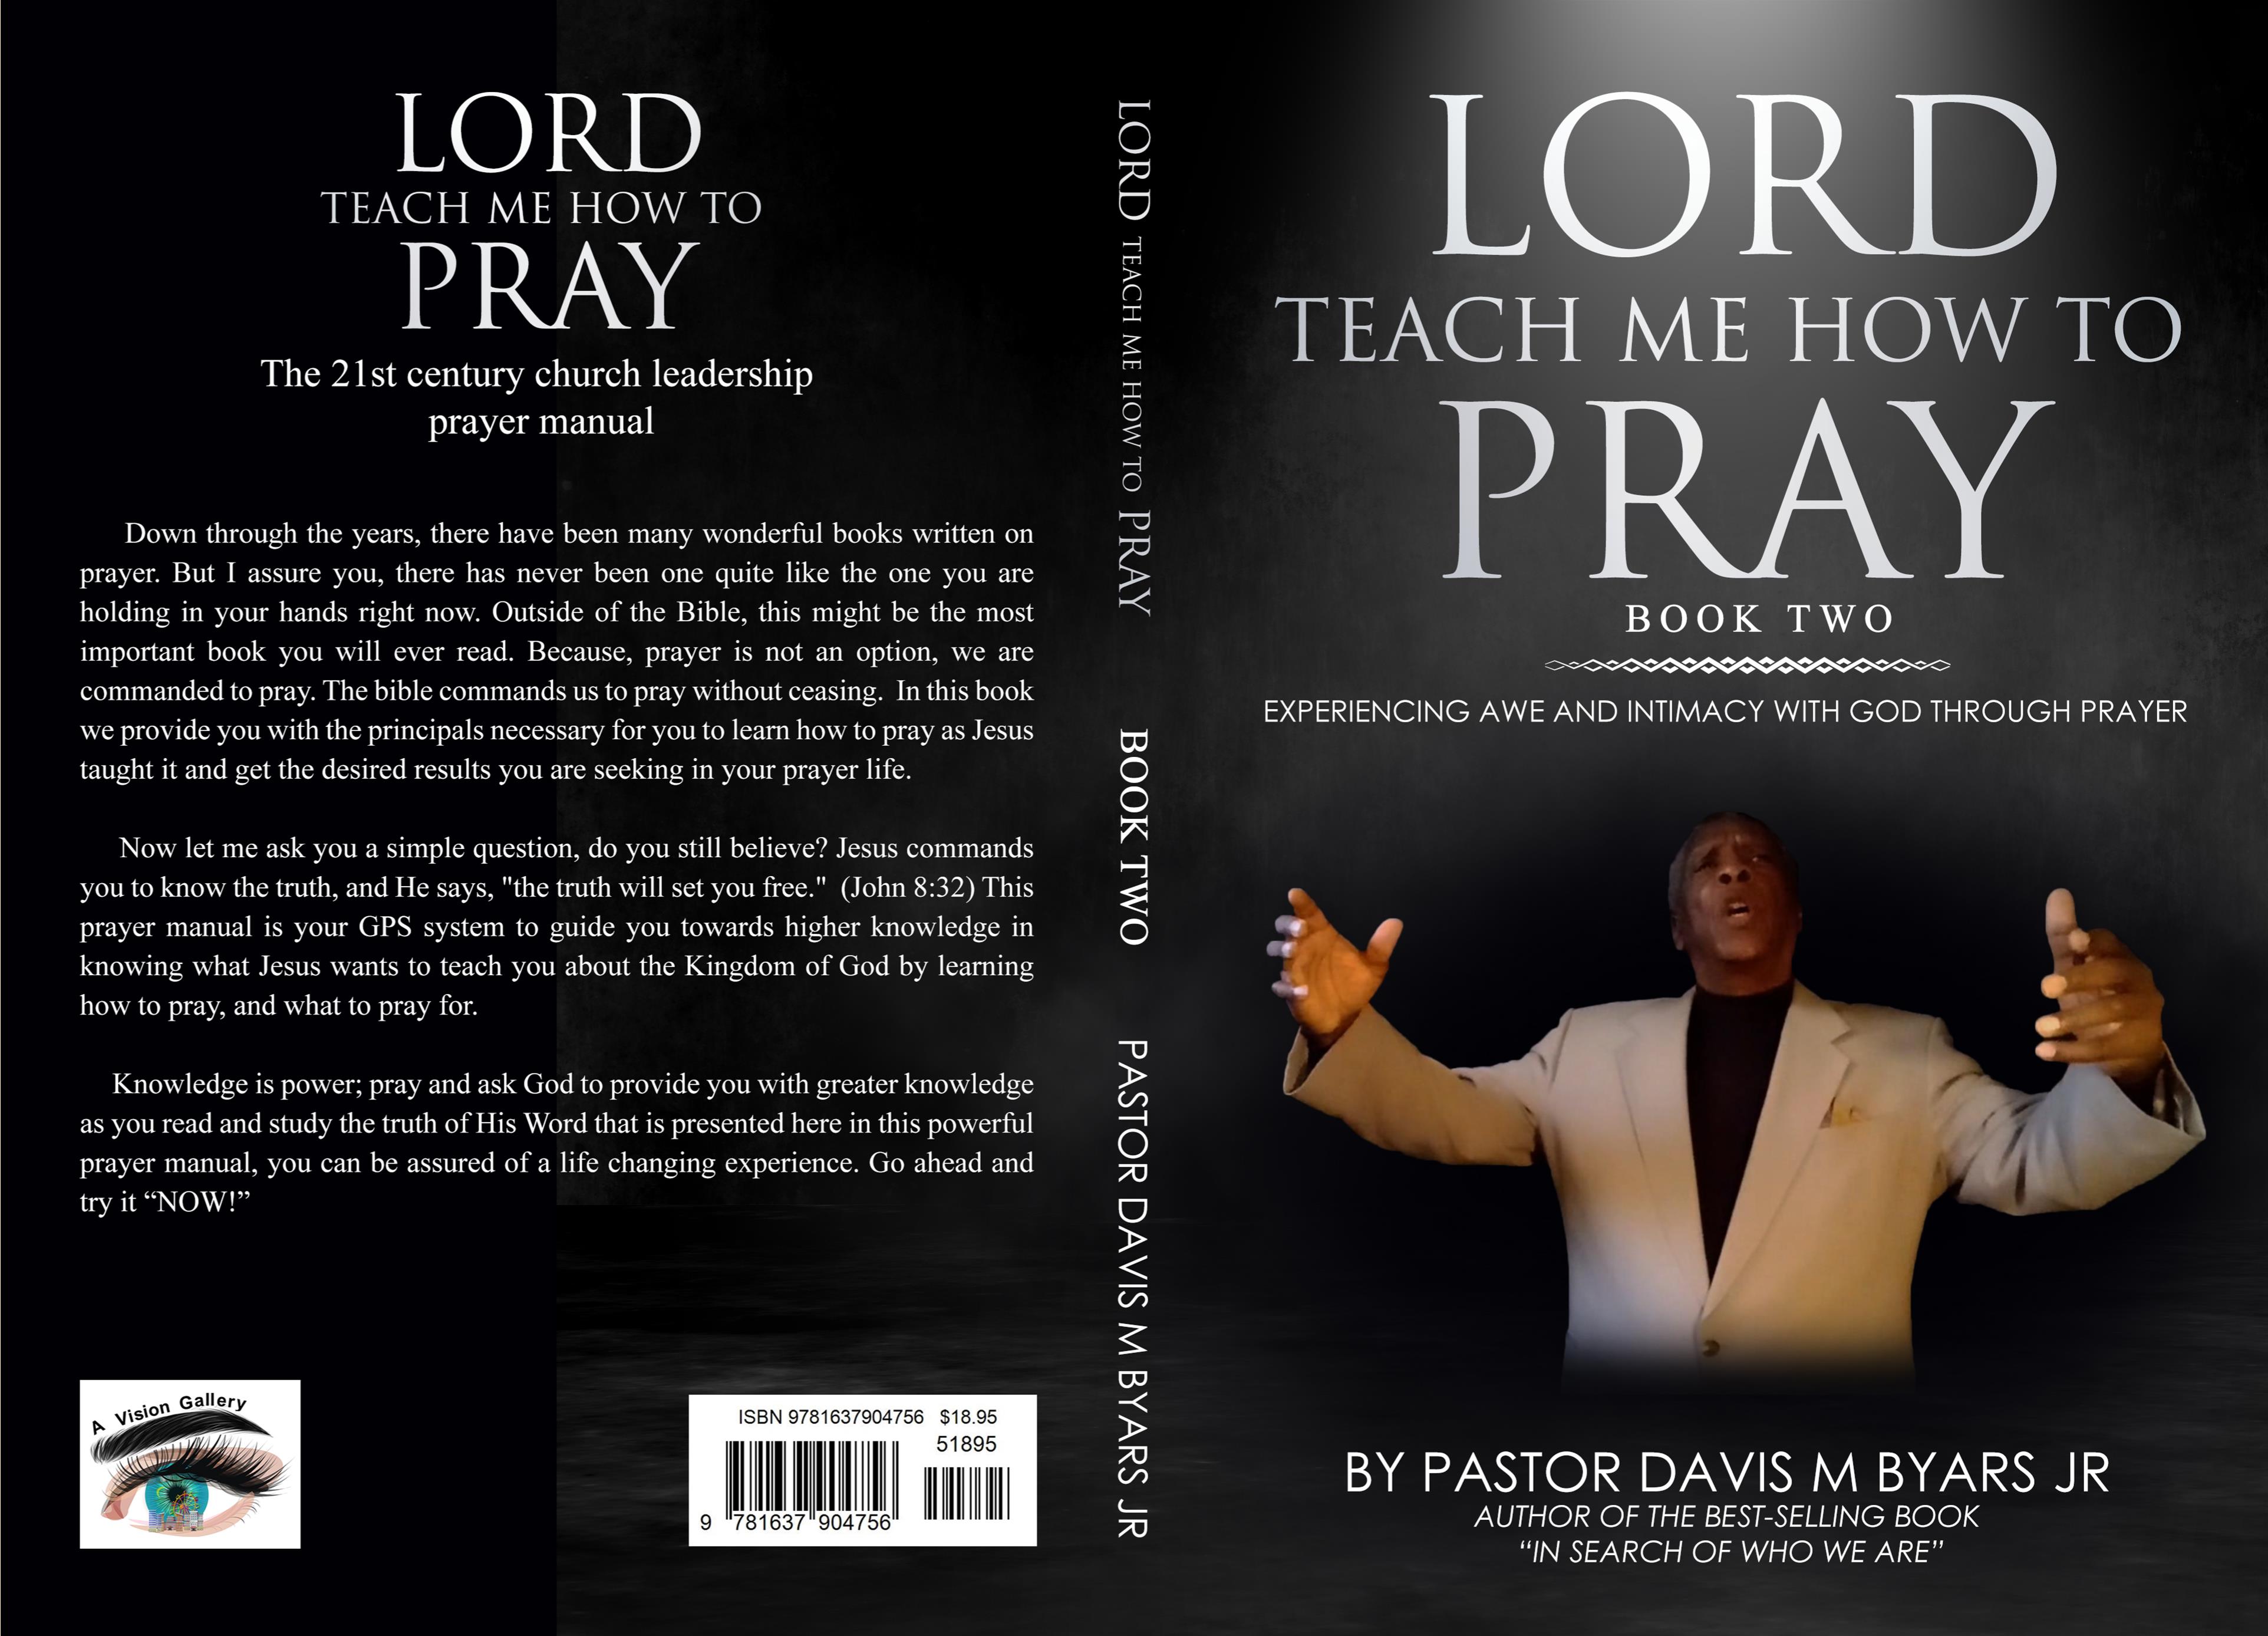 LORD TEACH ME HOW TO PRAY BOOK 2 cover image